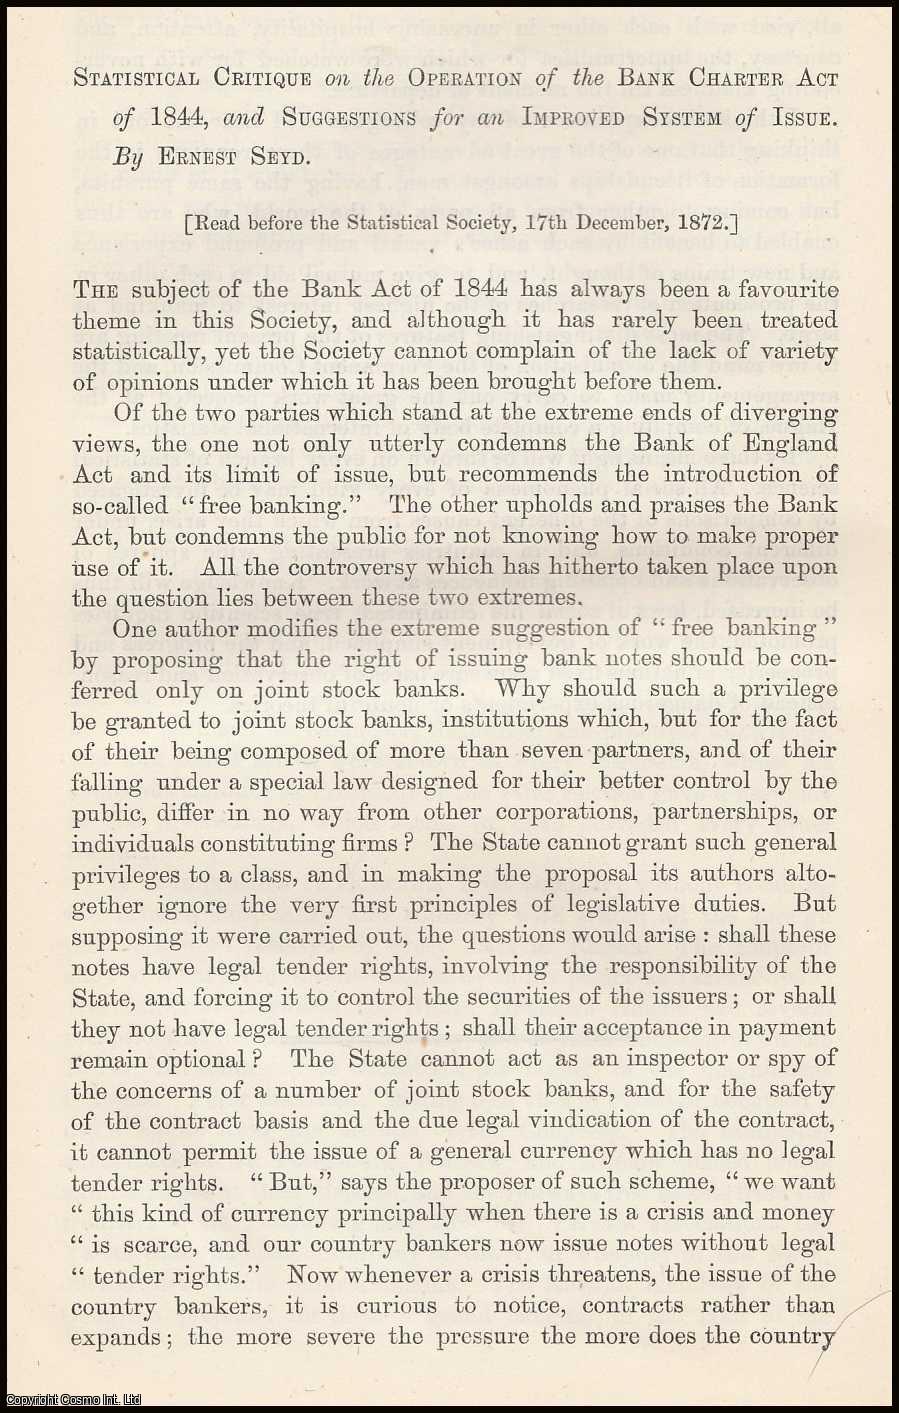 Seyd, Eernest. - Bank Charter Act. A Statistical Critique on the Operation of the Bank Charter Act of 1844, and Suggestions for an Improved System of Issue. A rare original article from the Journal of the Royal Statistical Society of London, 1872.